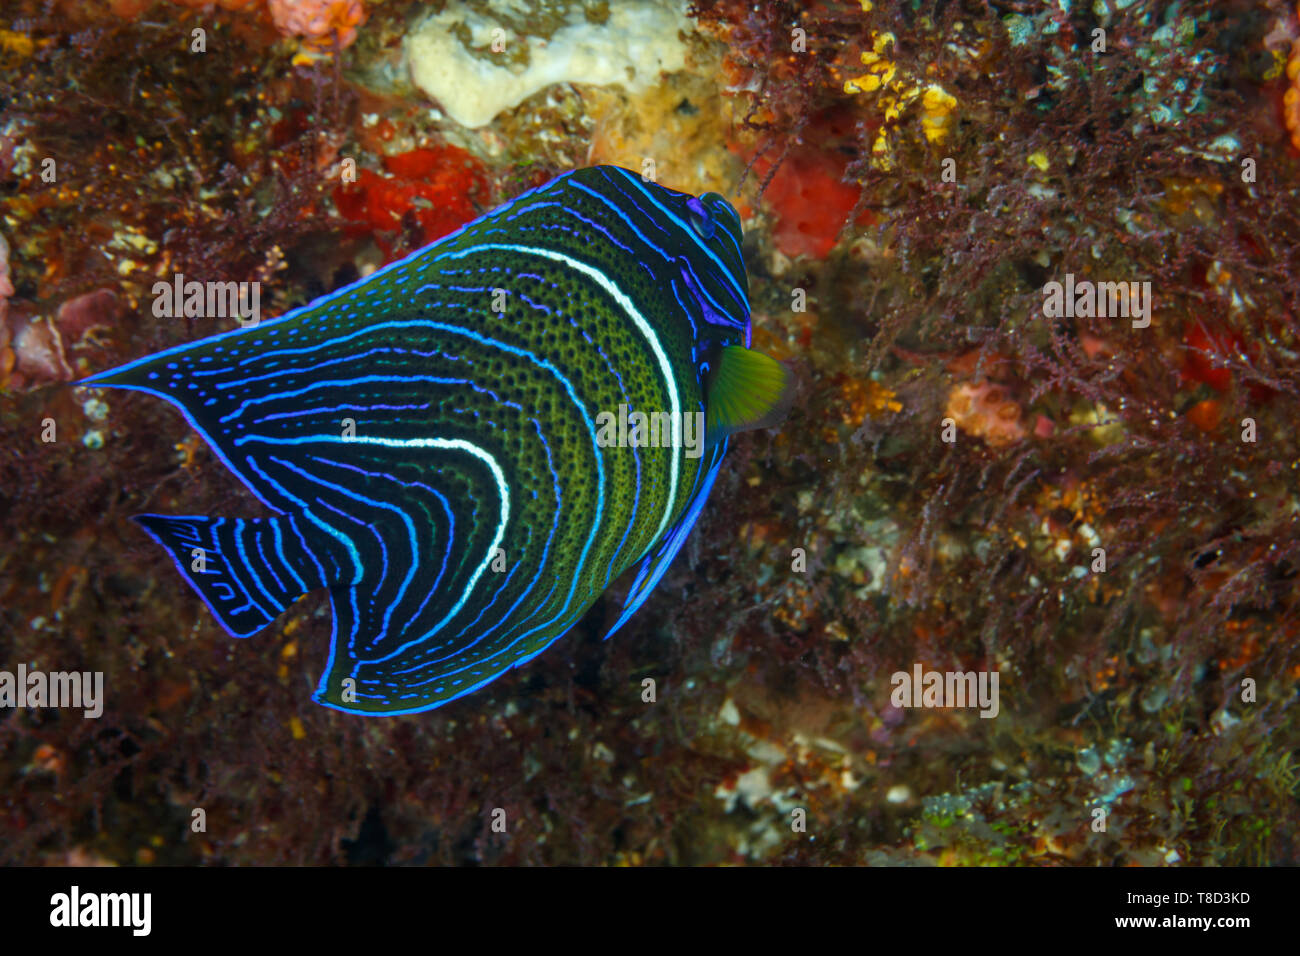 Closeup of juvenile emperor angelfish, pomacanthus imperator, with blue and white circle pattern of scales on side Stock Photo